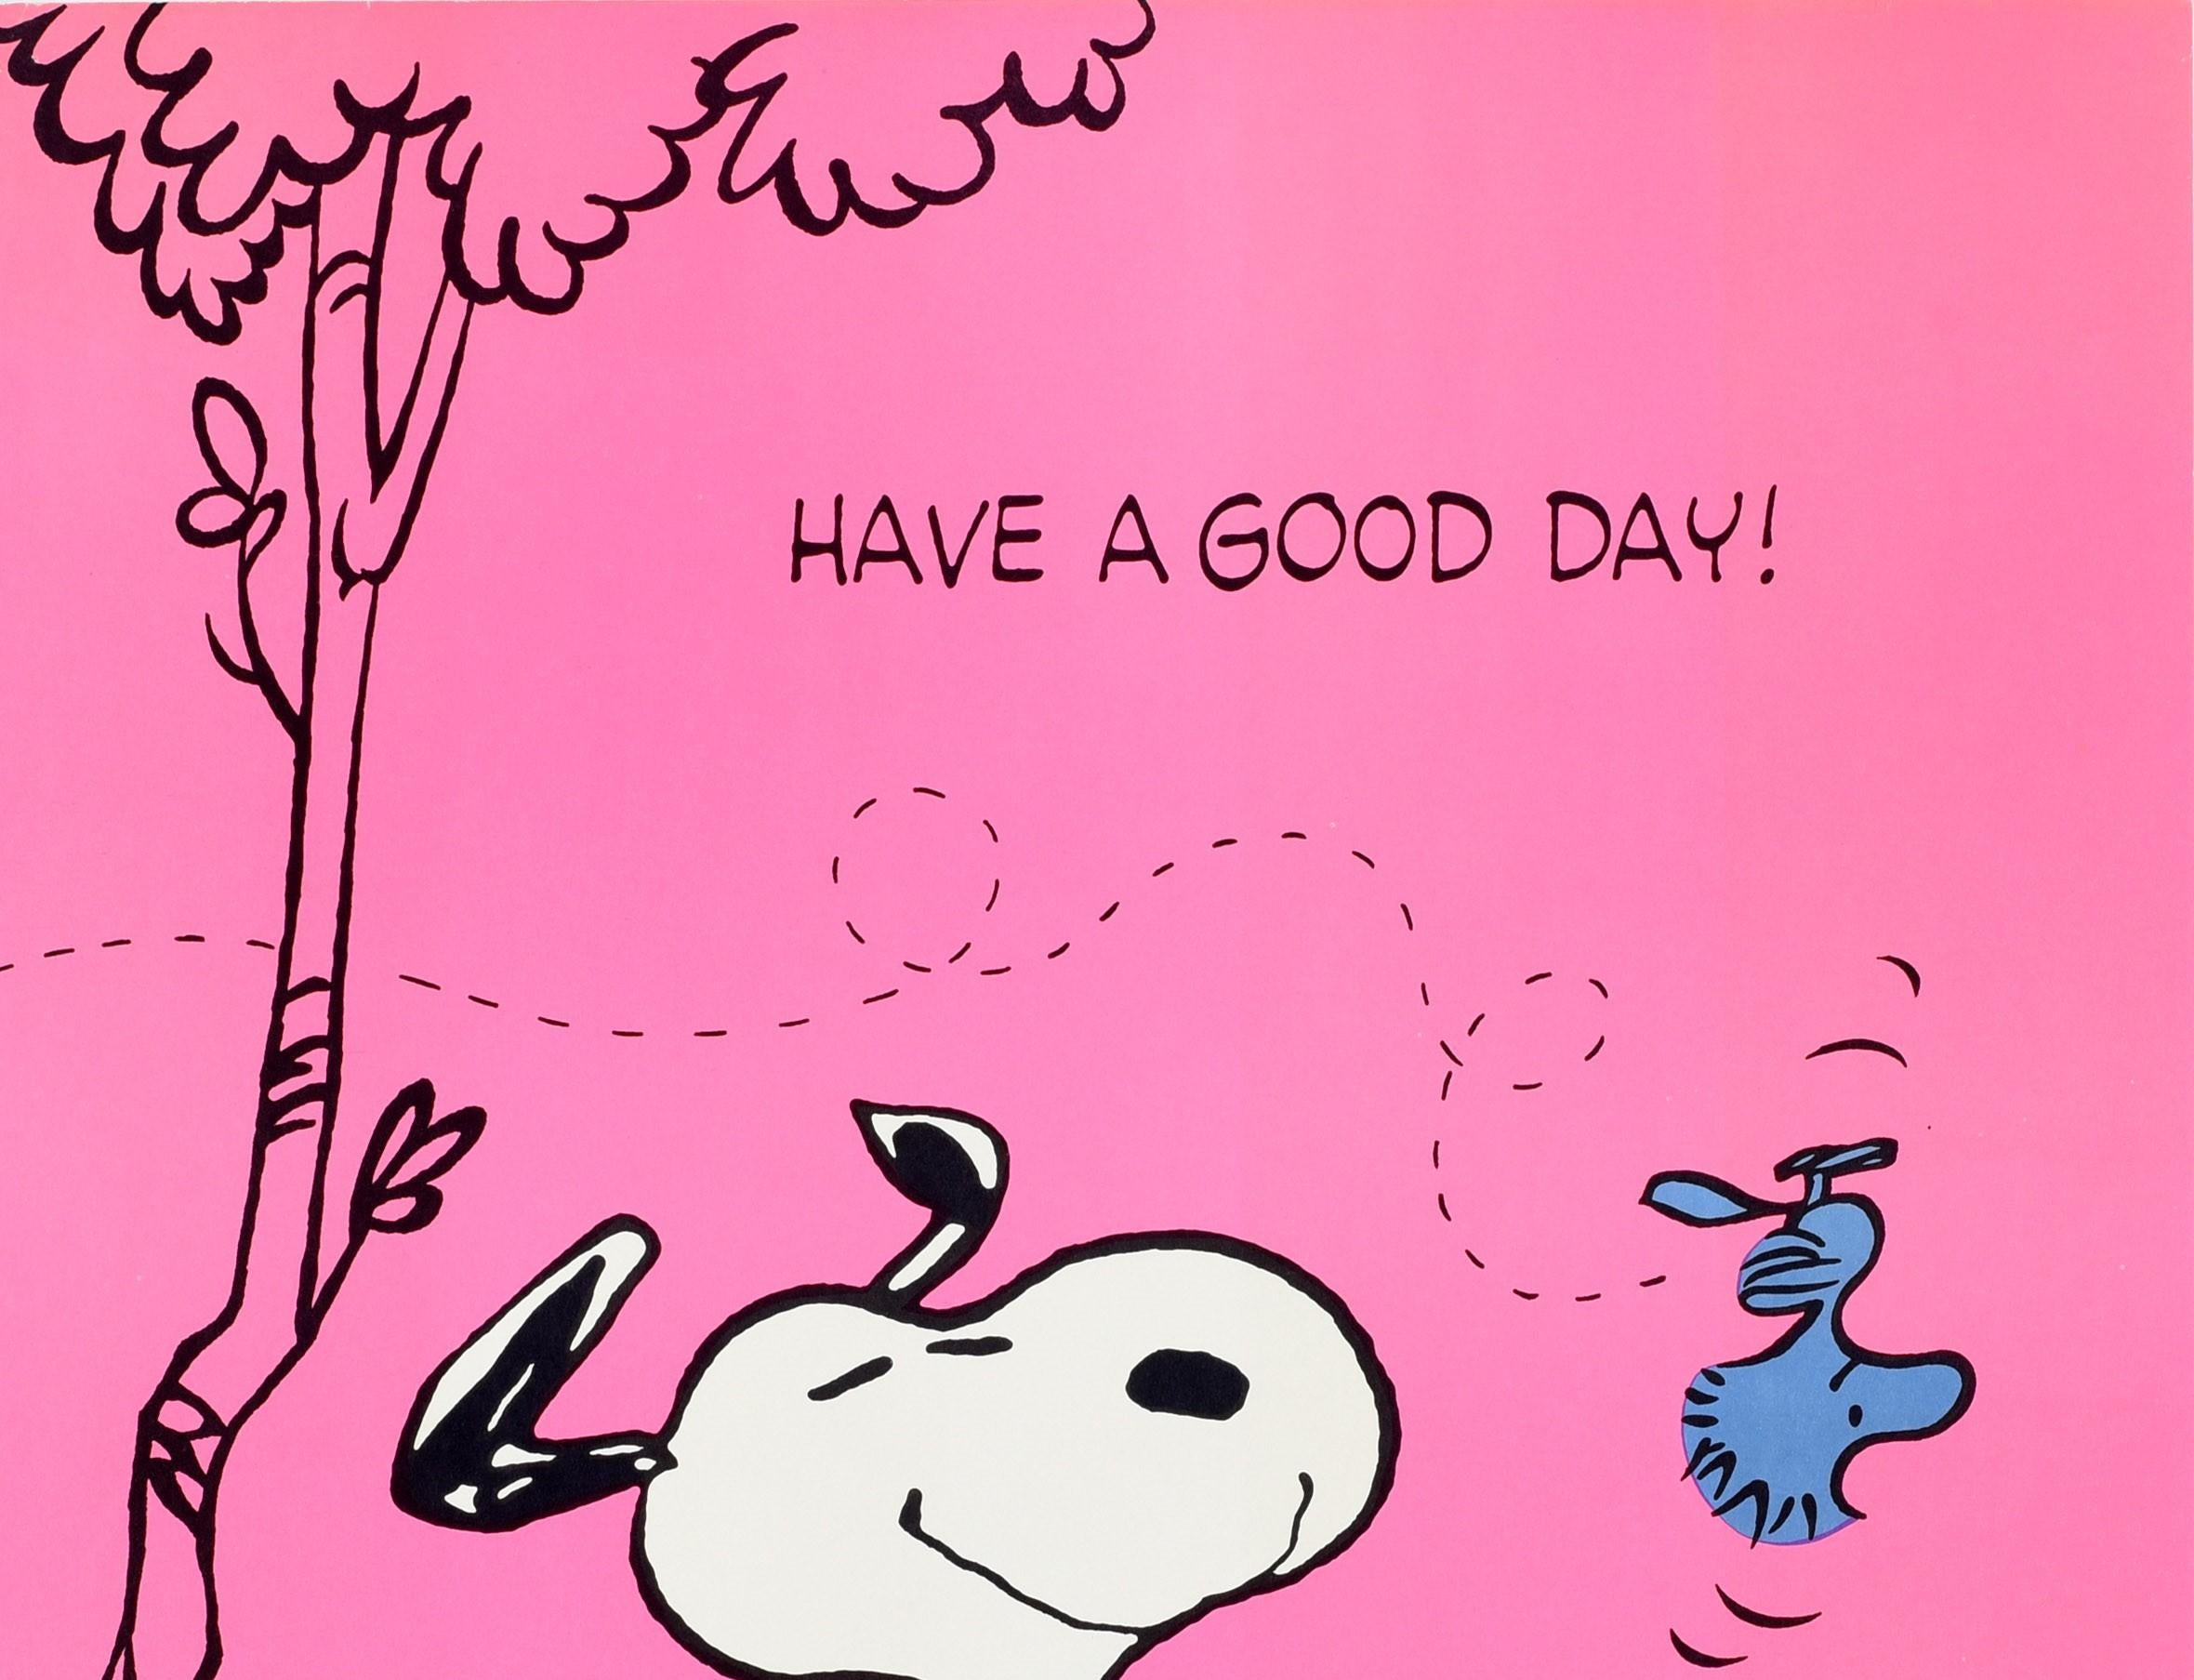 Original vintage poster featuring the iconic comic character Snoopy the Dog by the notable American cartoonist Charles M. Schulz (Charles Monroe Schulz; 1922-2000) - Have a good day! Fun design featuring a smiling Snoopy skipping past a tree behind